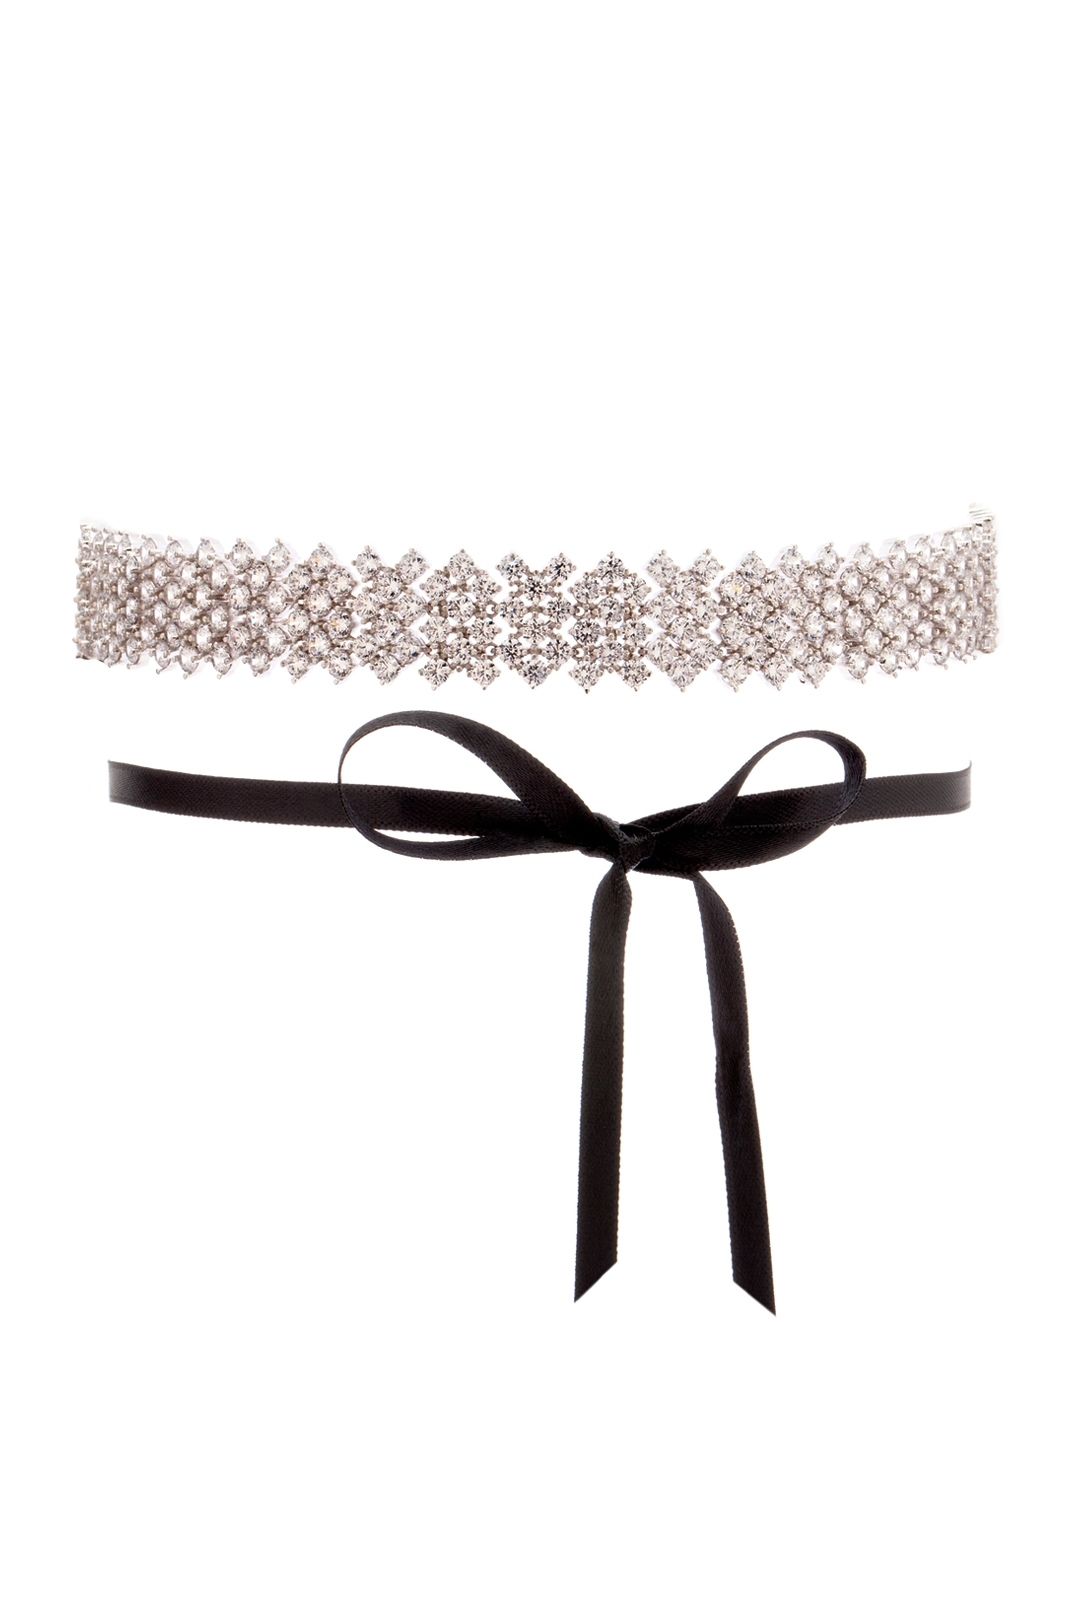 Amber Sceats - Miley Choker - Silver Black - Front